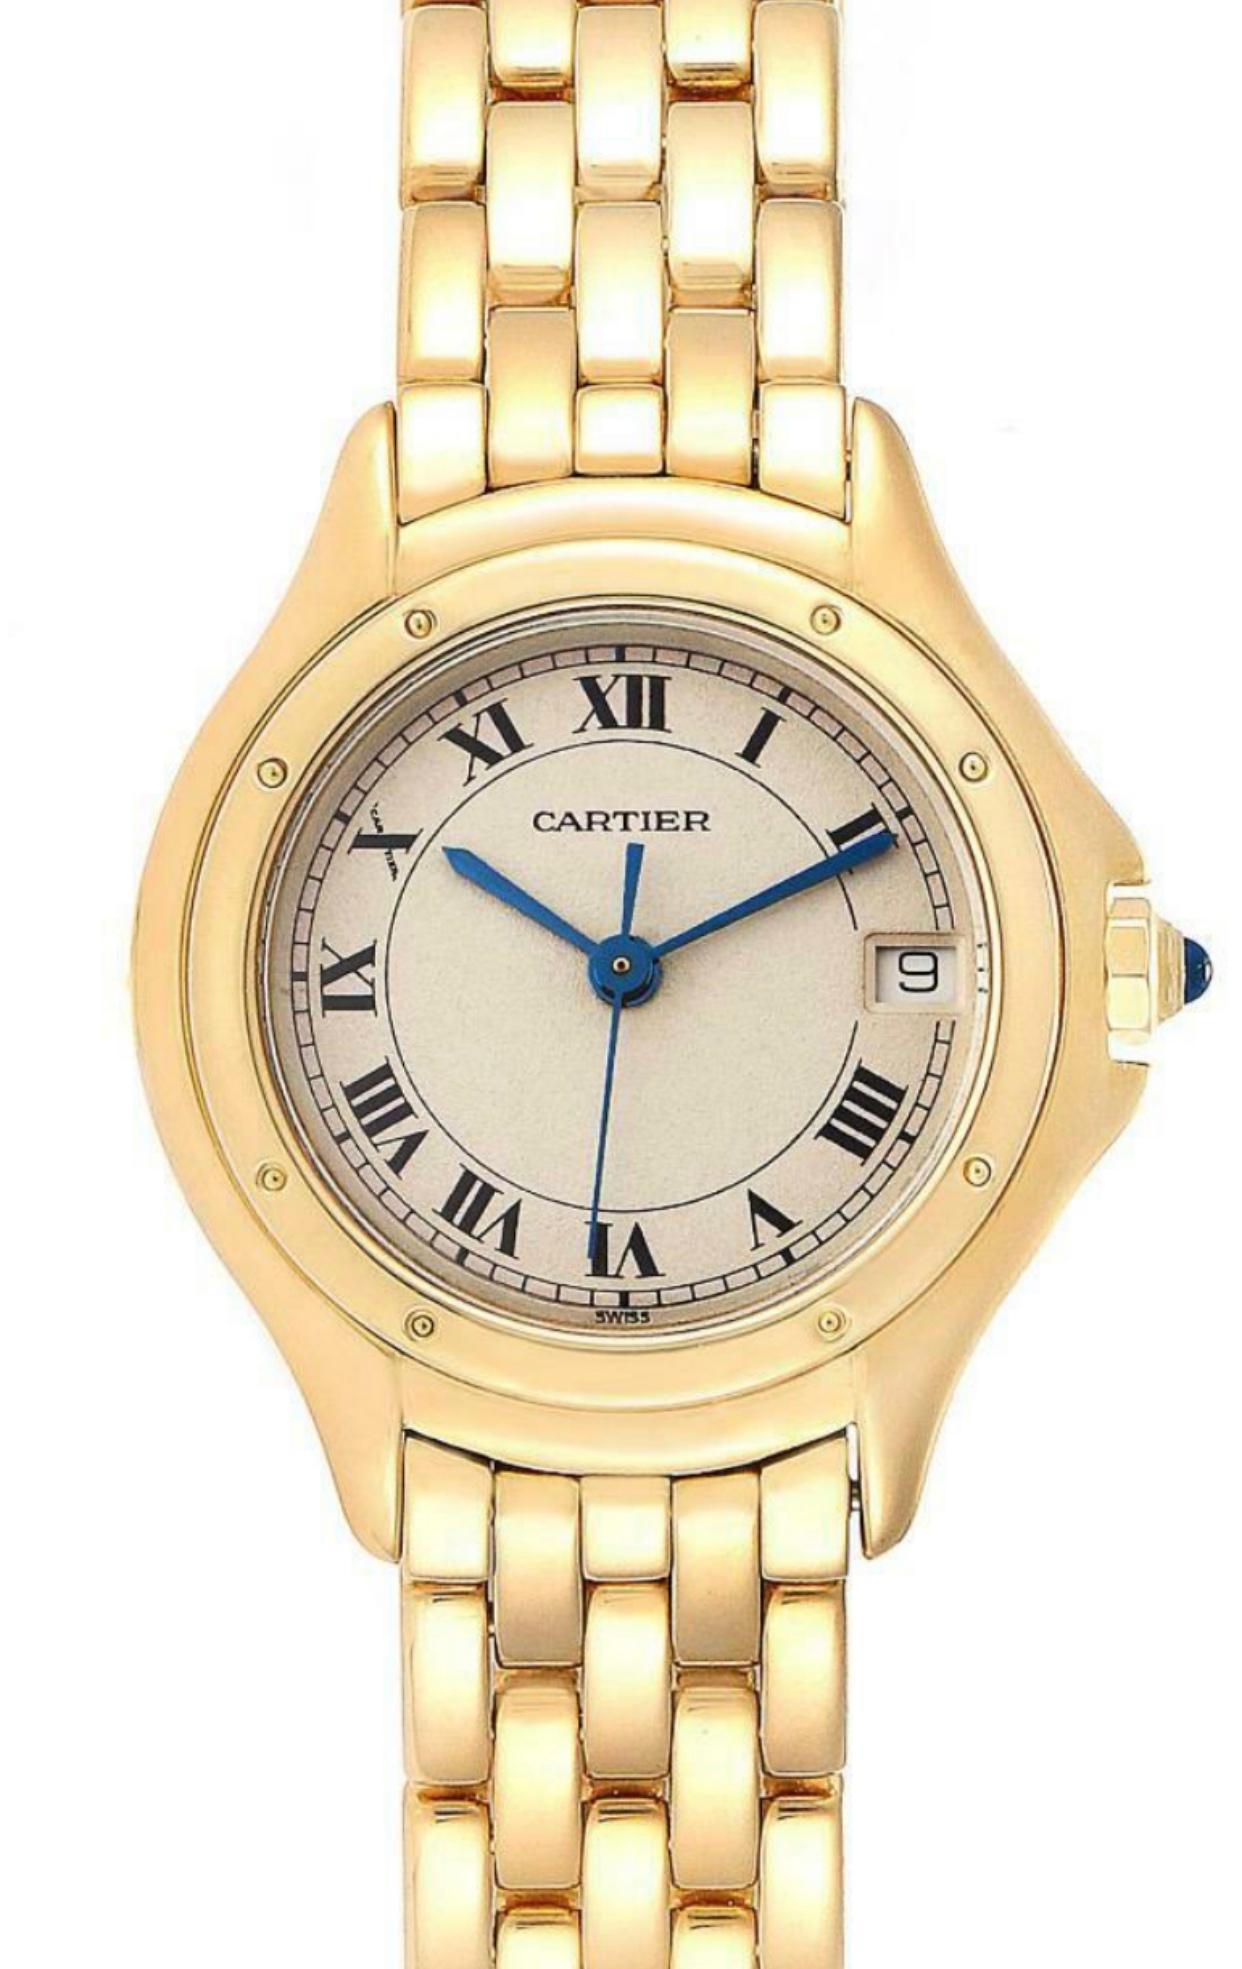 Cartier Panthere Cougar 18K Yellow Gold Ladies Watch . Quartz movement. 18k yellow gold round case 26.0 mm in diameter Octagonal crown set with the diamond. 18k yellow gold bezel. Scratch resistant sapphire crystal. Silver dial with roman numerals.